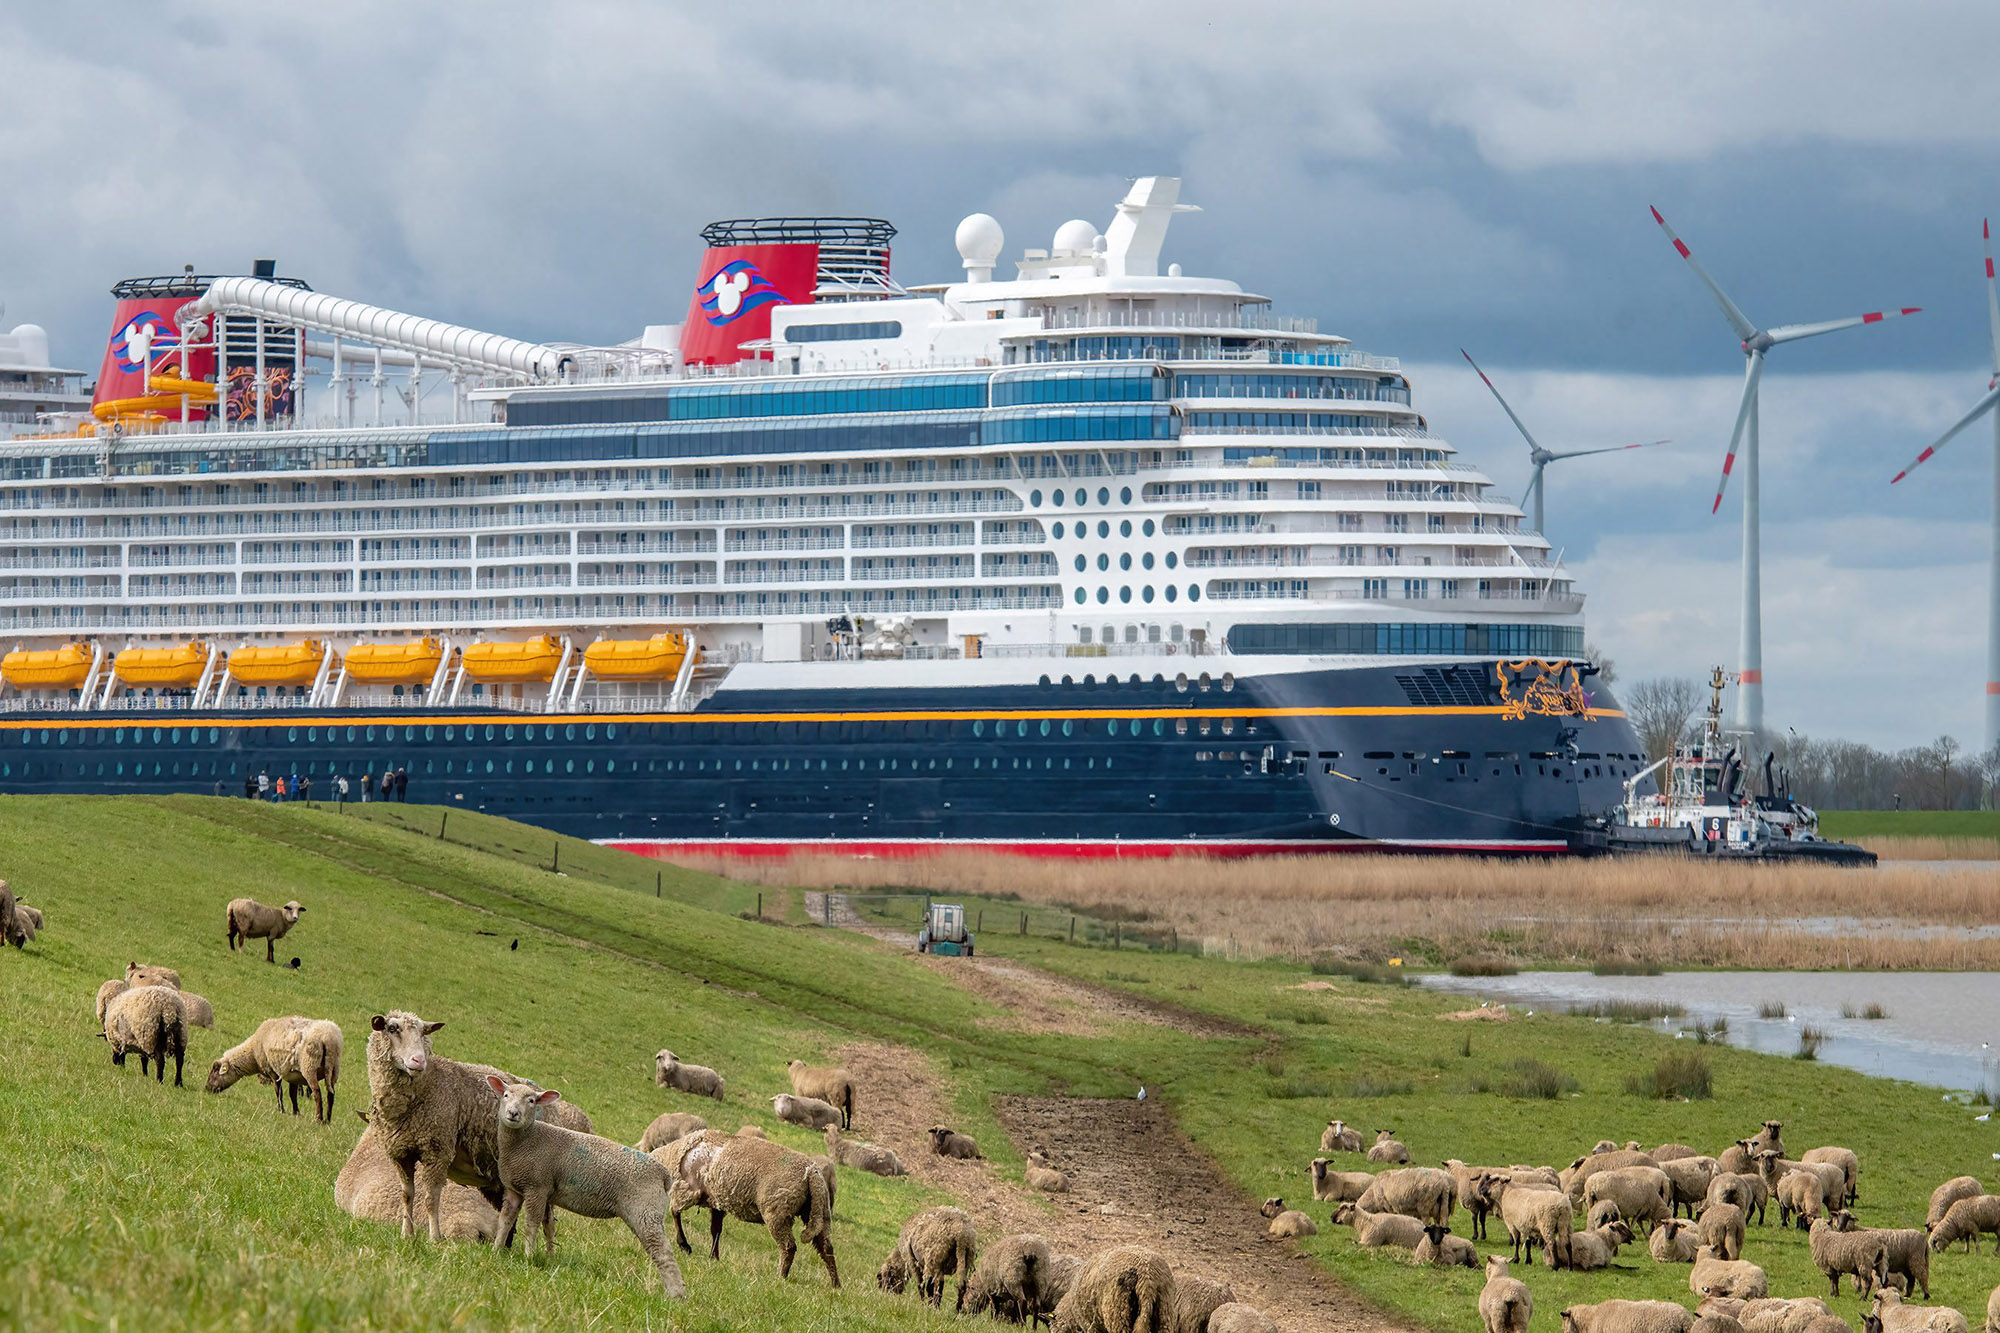 Disney Cruise Line's new ship Disney Wish travels on the Ems River from the Meyer Werft shipyard on its way to sea trials in the North Sea on March 30, 2022. (Robert Fiebak/Disney Cruise Line/TNS)